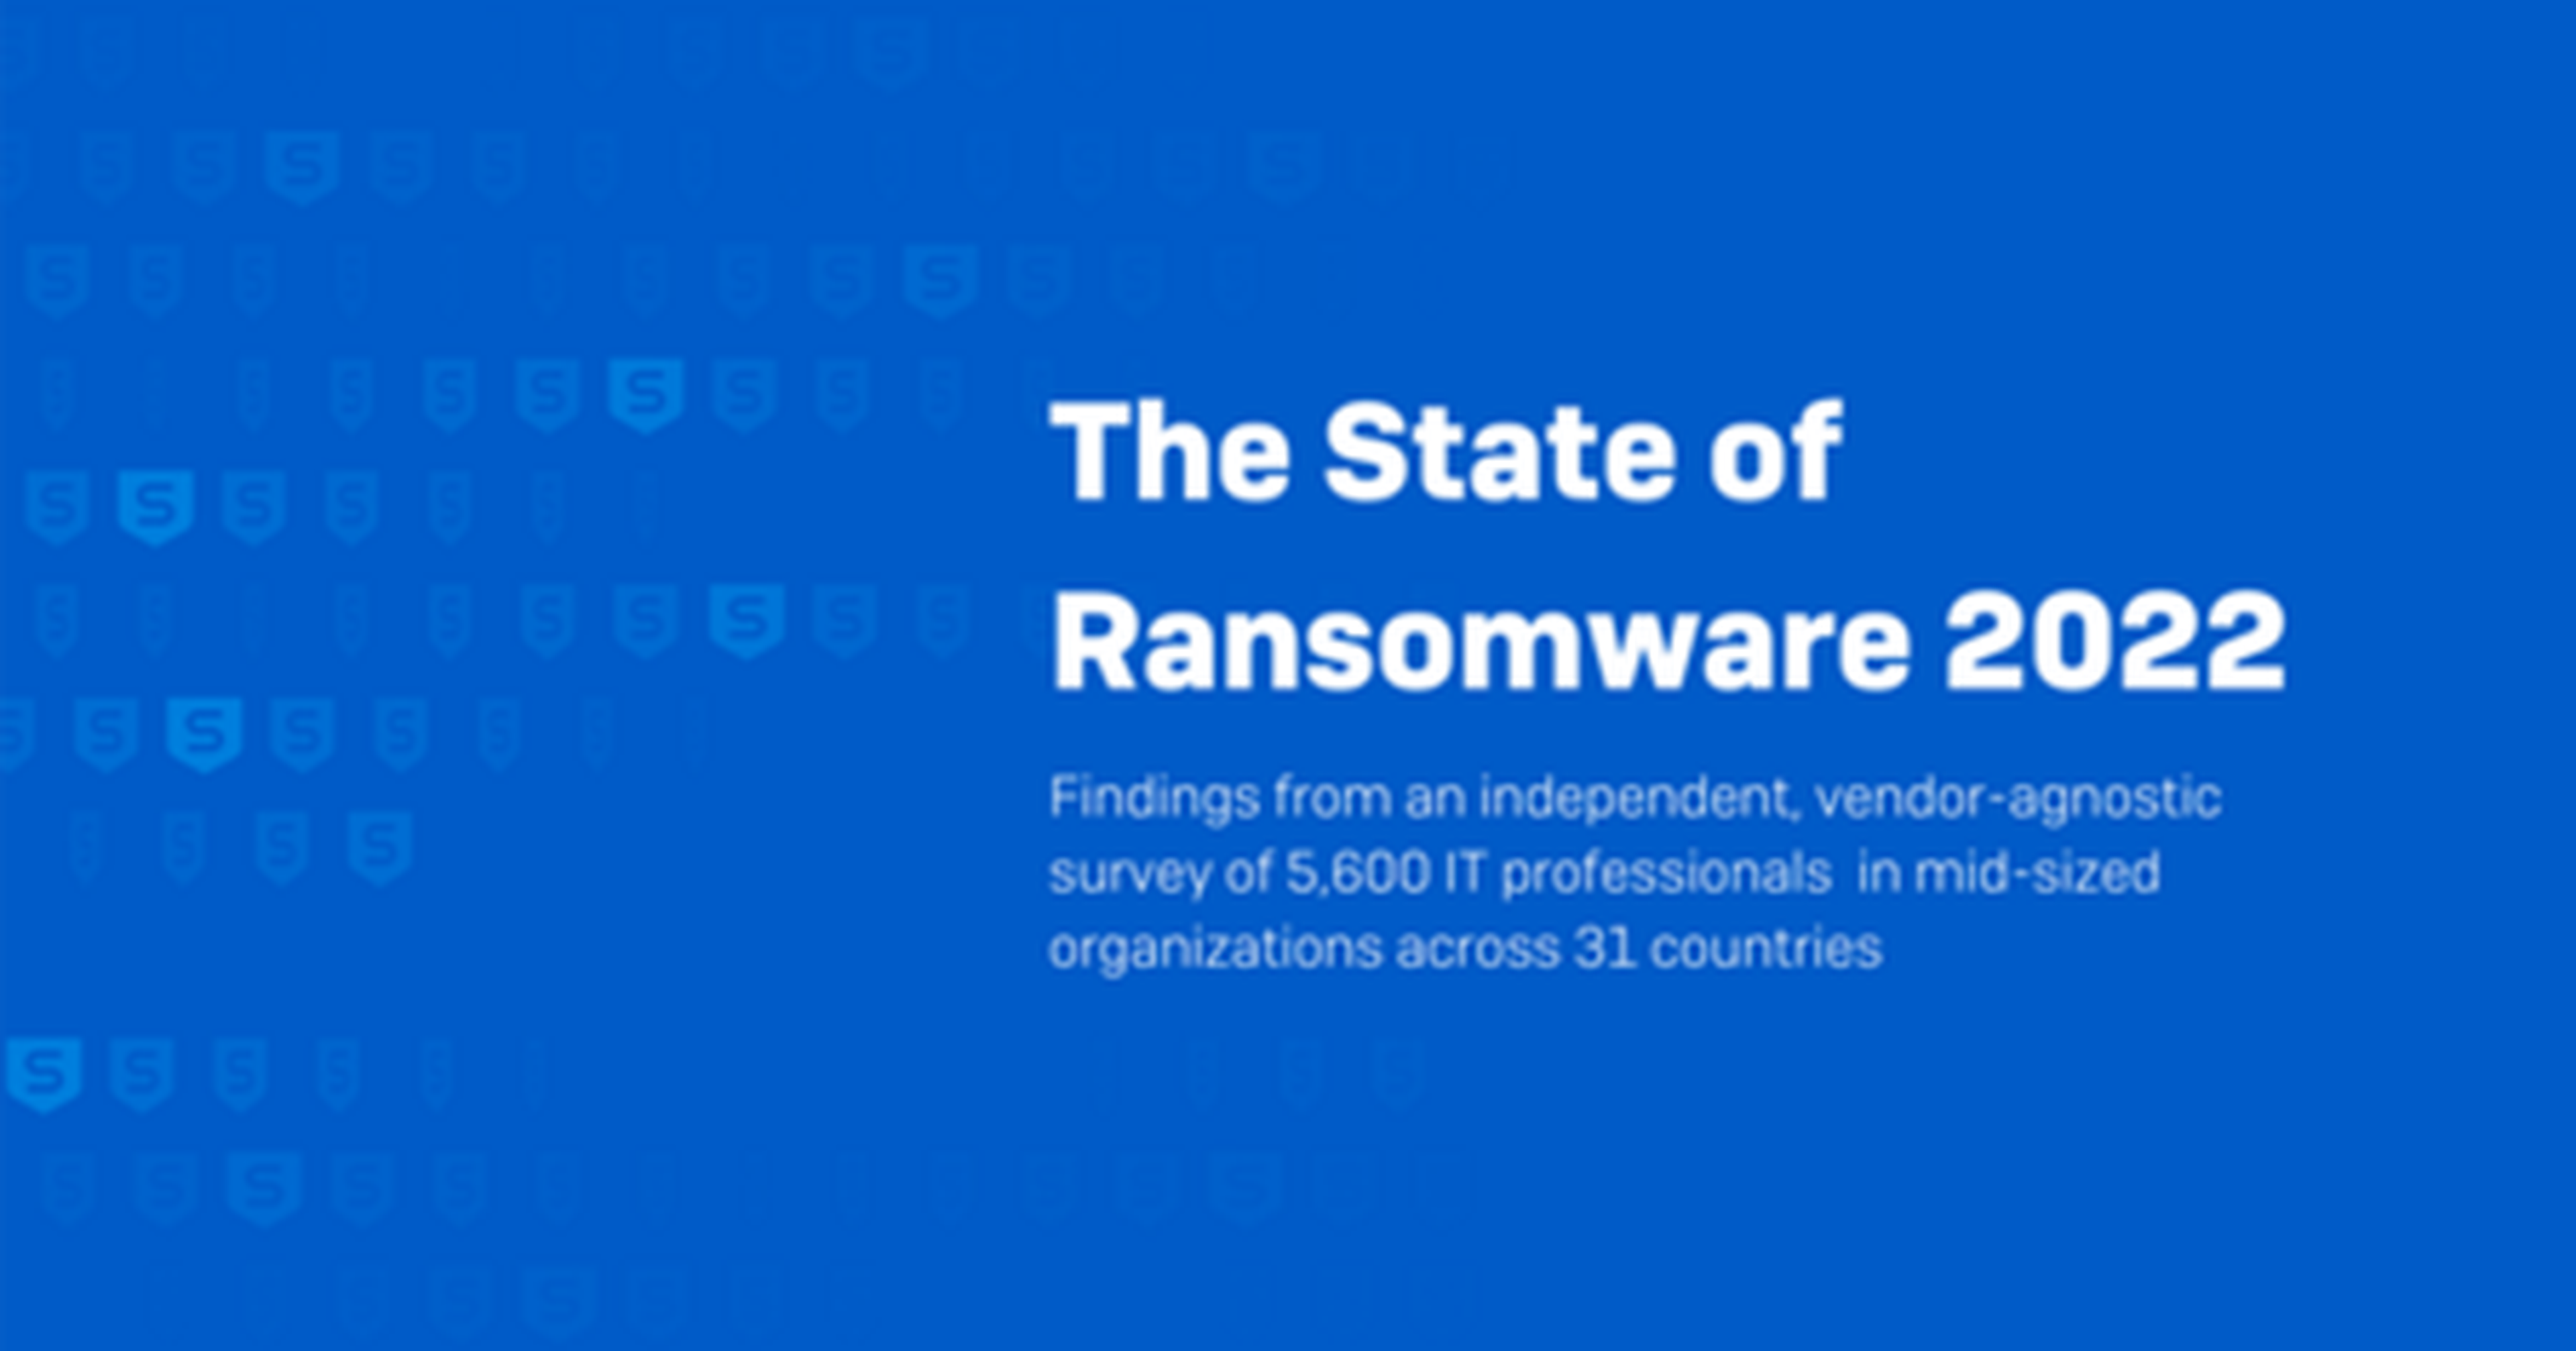 The State of Ransomware 2022